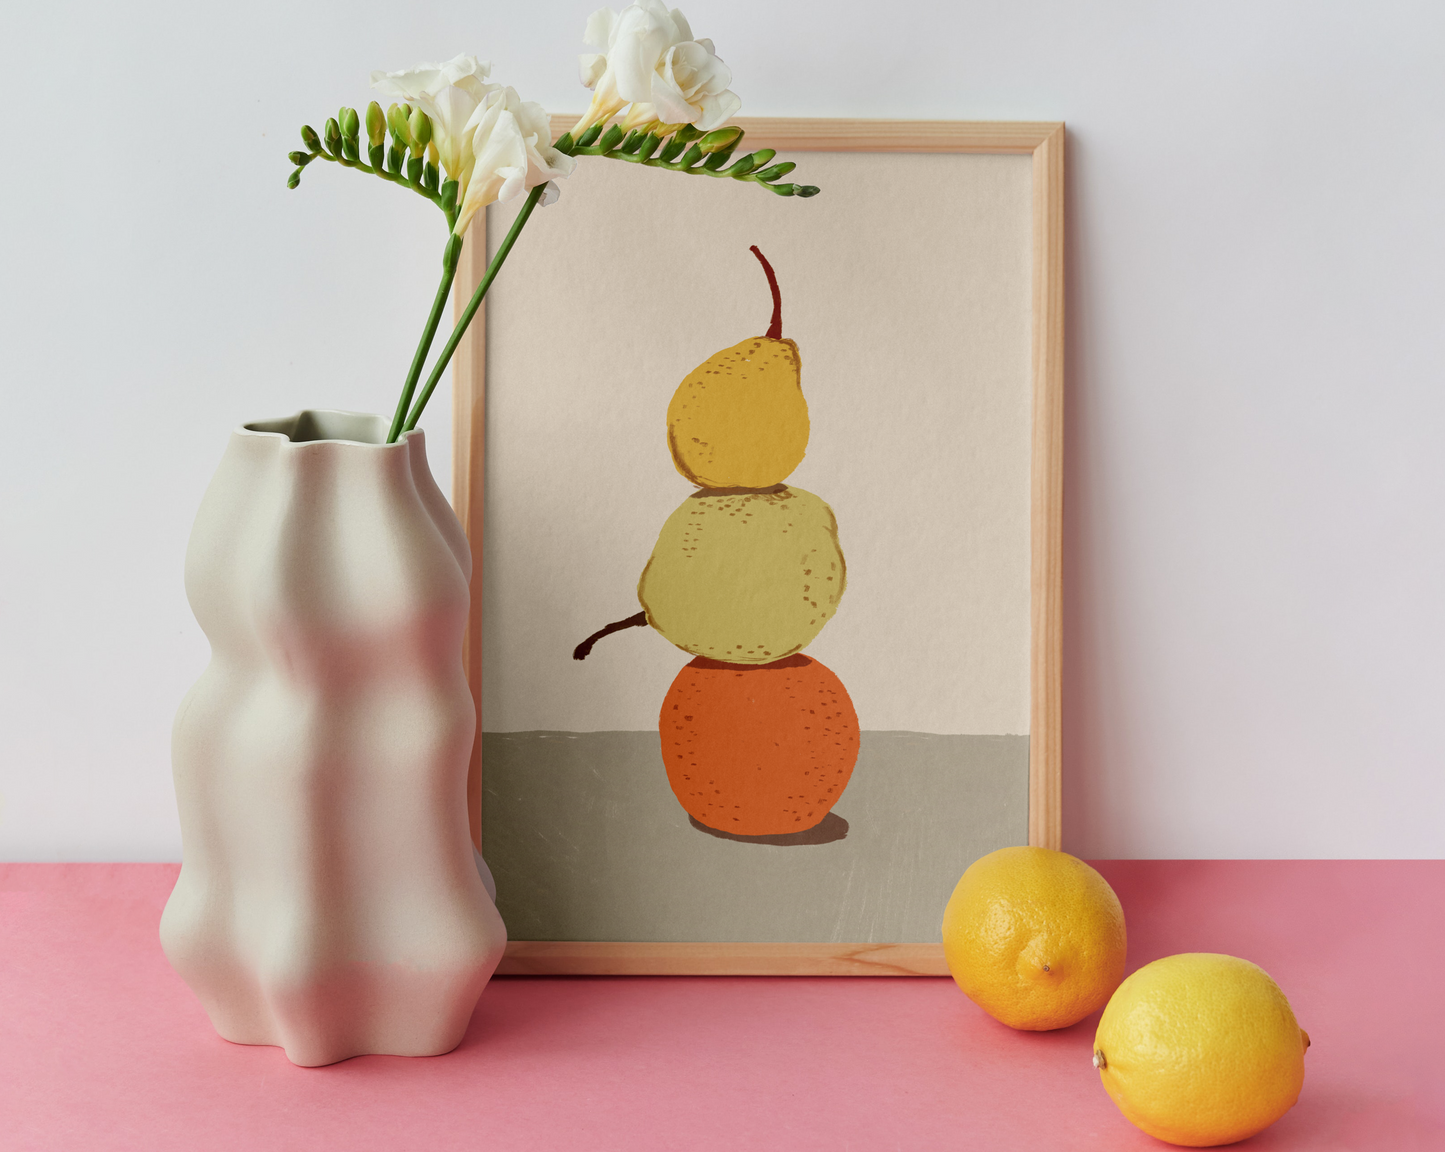 Pears - Single piece Minimalist & colorful Art | Painted Wall Canvas In August Shop